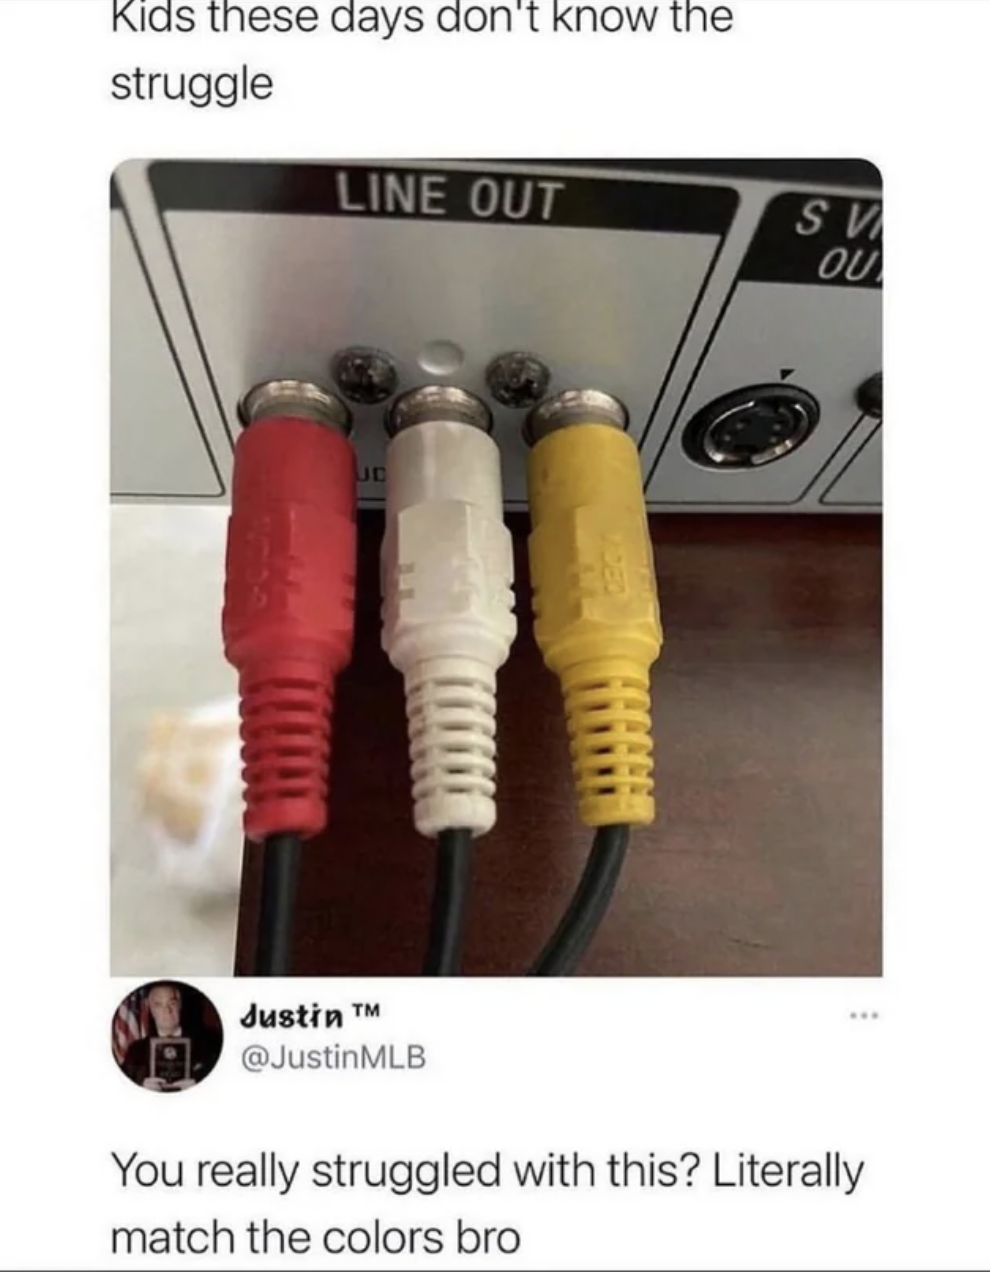 funny facepalms - cable - Kids these days don't know the struggle Line Out Je Justin M Sv Ou You really struggled with this? Literally match the colors bro